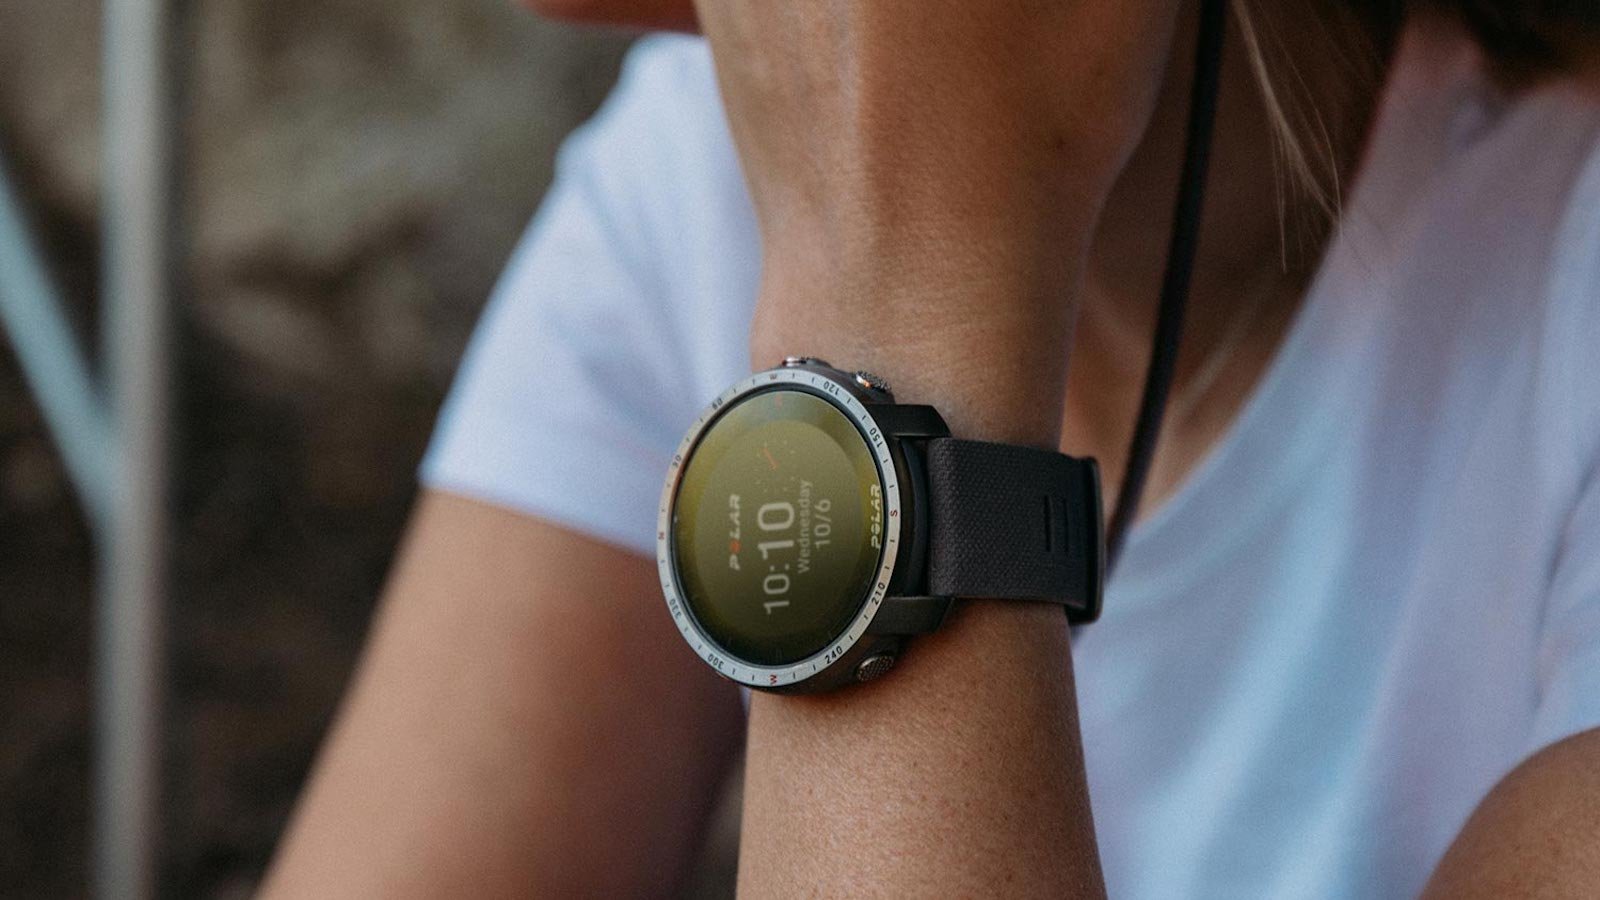 Polar Grit X Pro multi-sport smartwatch has new navigation tools and a long battery life